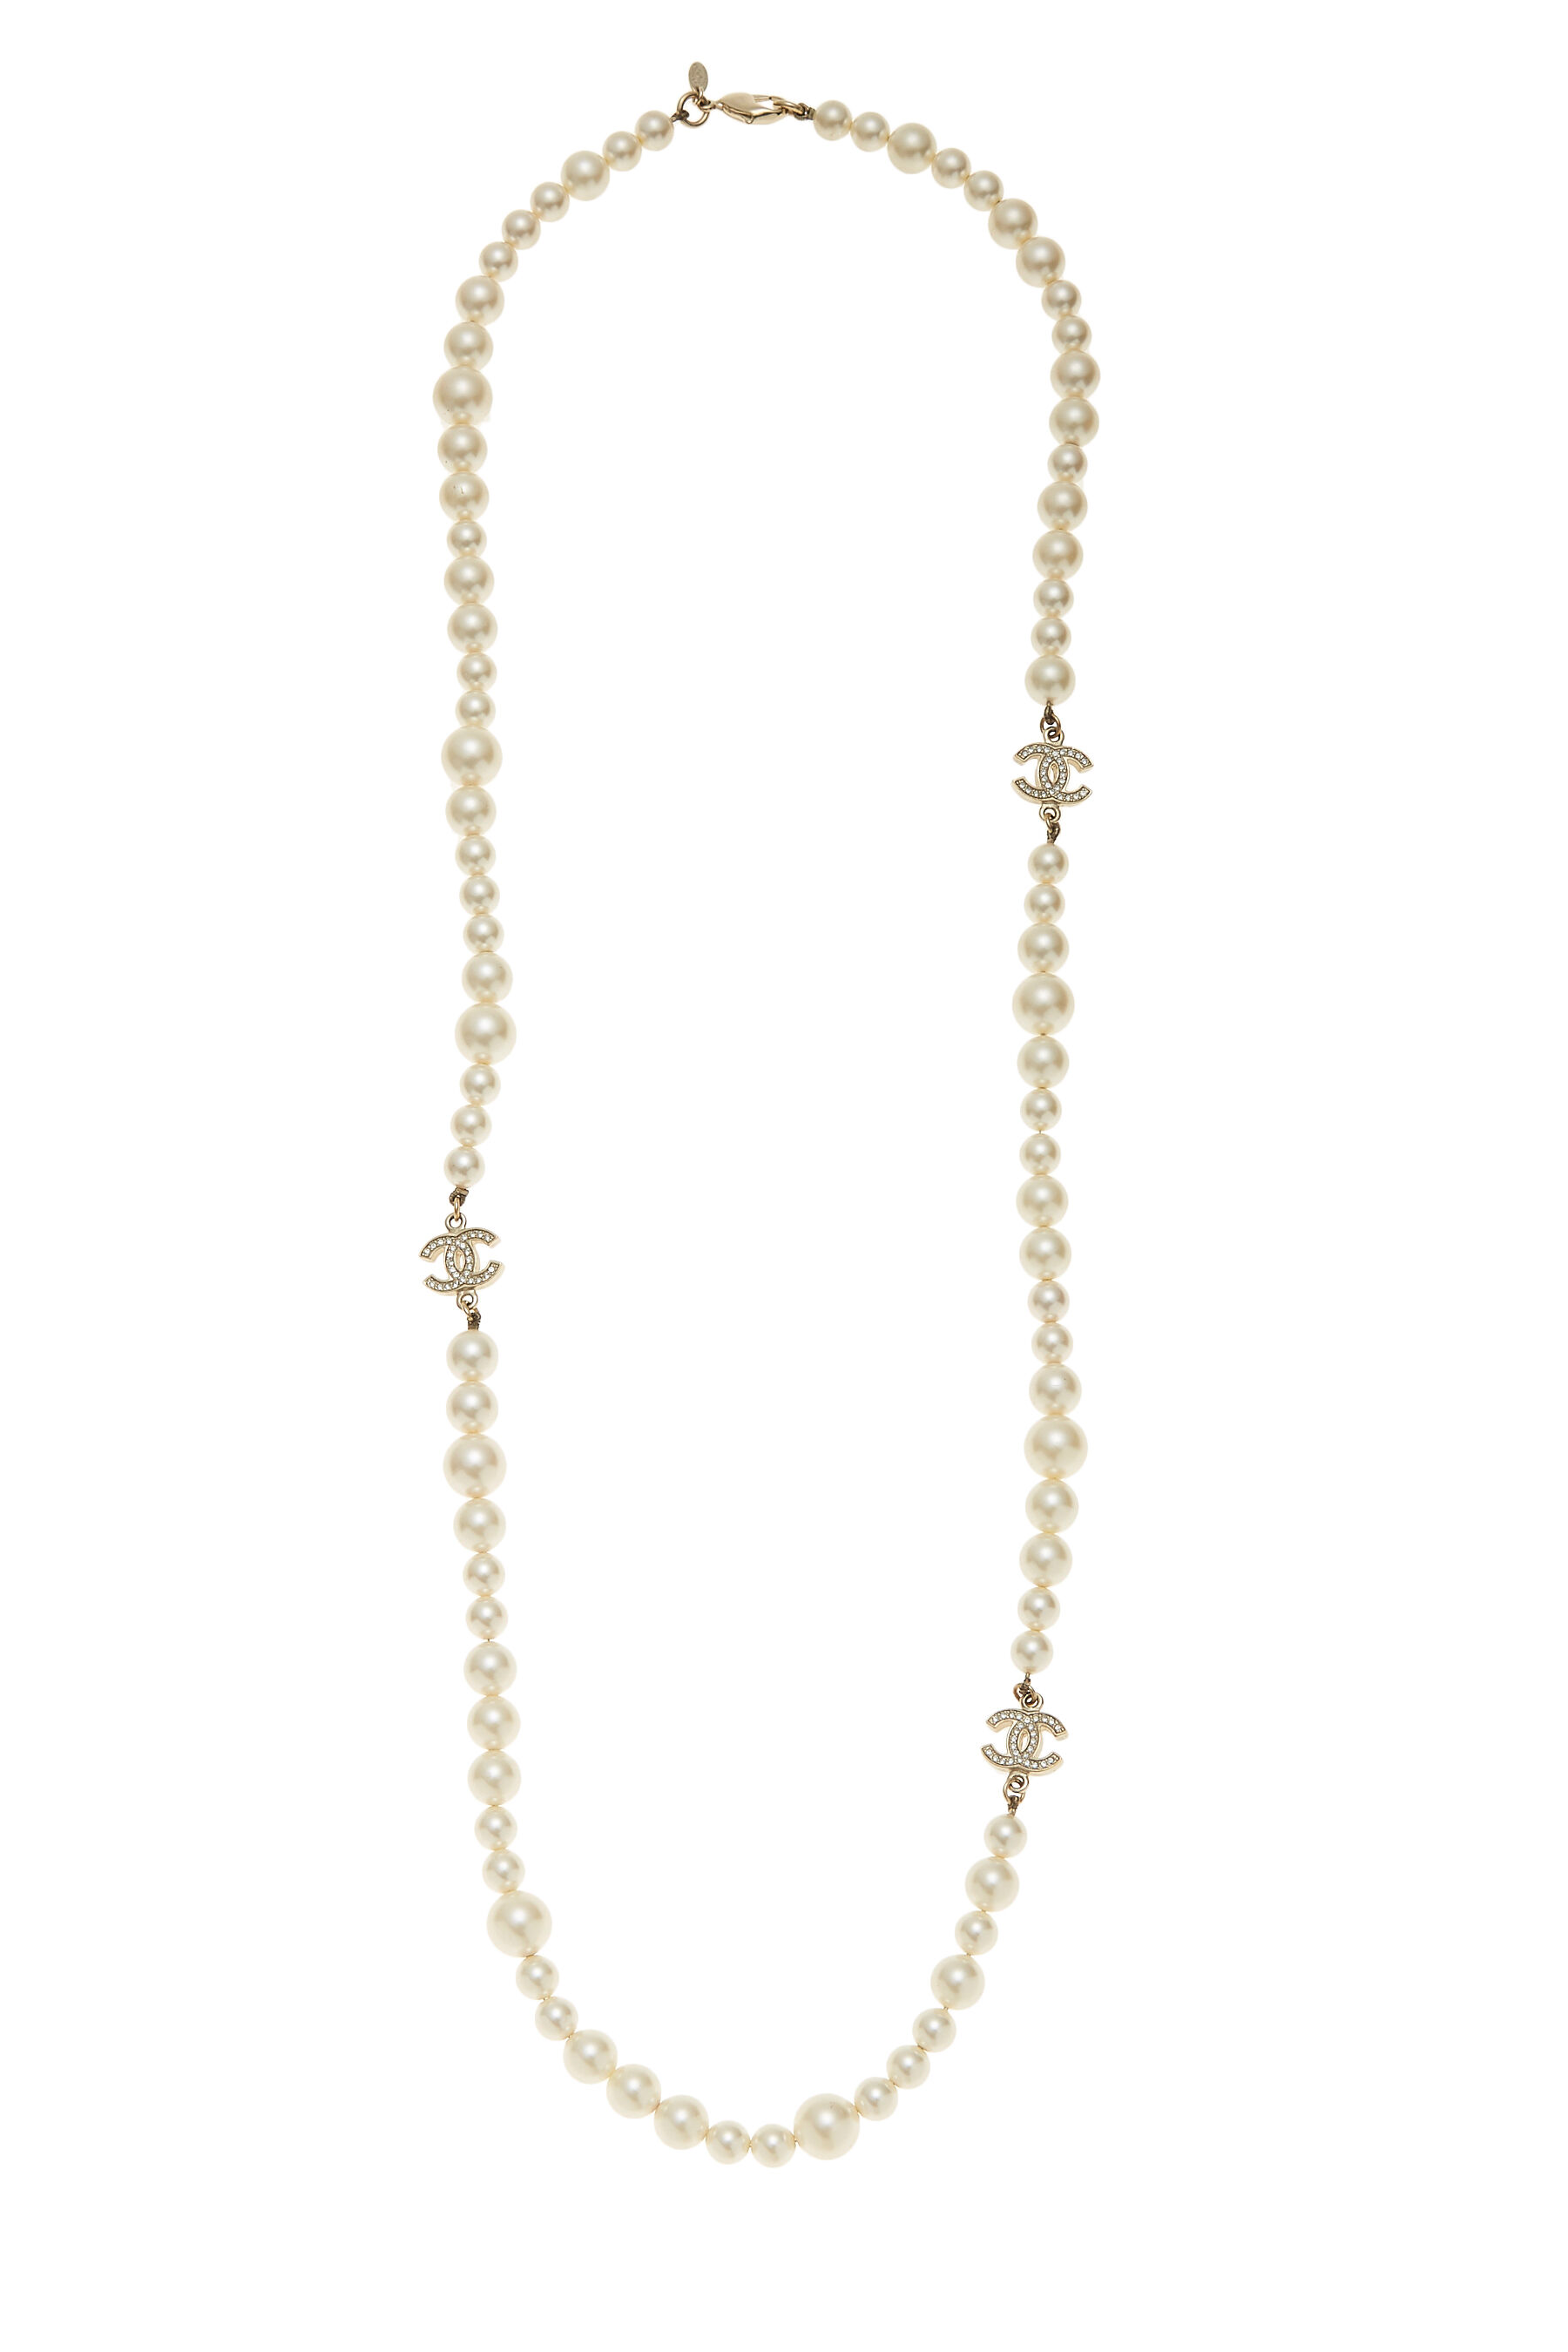 Chanel - Faux Pearl & Crystal 'CC' Long Necklace